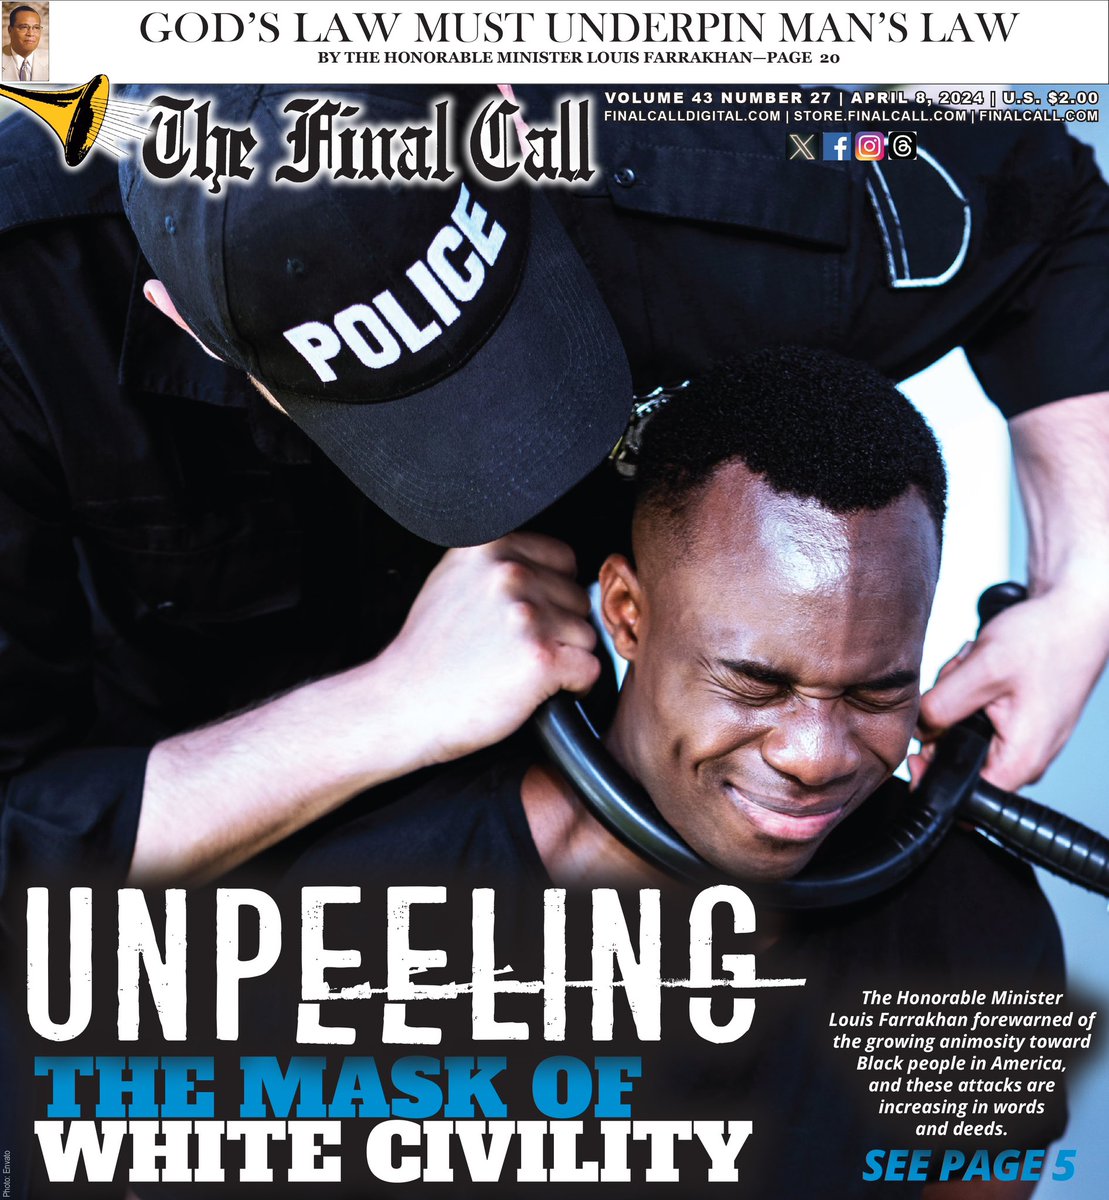 NEW EDITION ::: UNPEELING THE MASK OF WHITE CIVILITY The Honorable Minister @LouisFarrakhan forewarned of the growing animosity toward Black people in America, and these attacks are increasing in words and deeds. Get your copy today at finalcalldigital.com